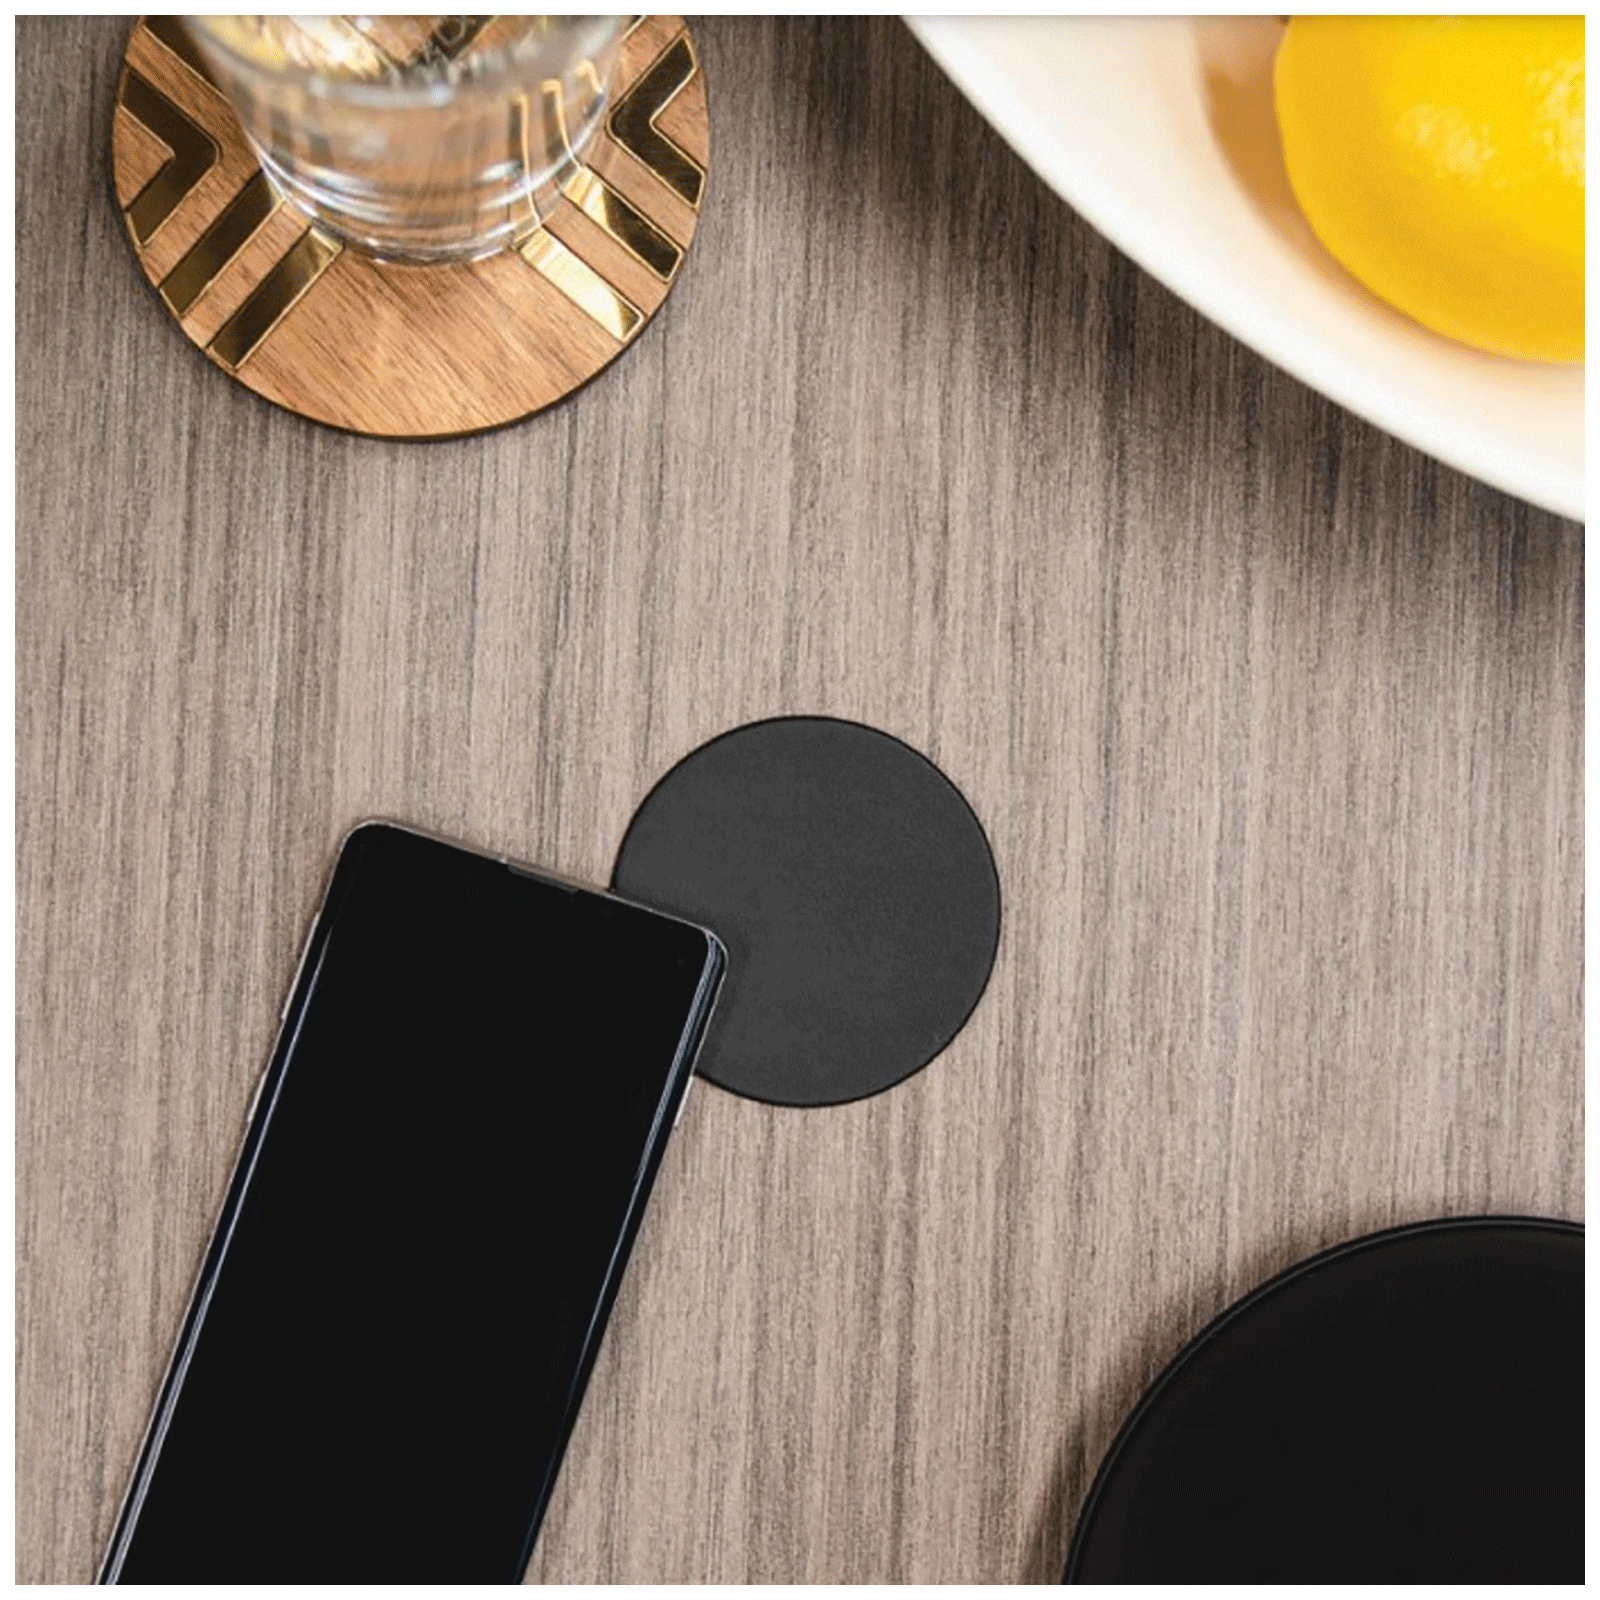 A Qi-compatible wireless charging pad that can charge a variety of devices, including smart phones, tablets, and smart watches